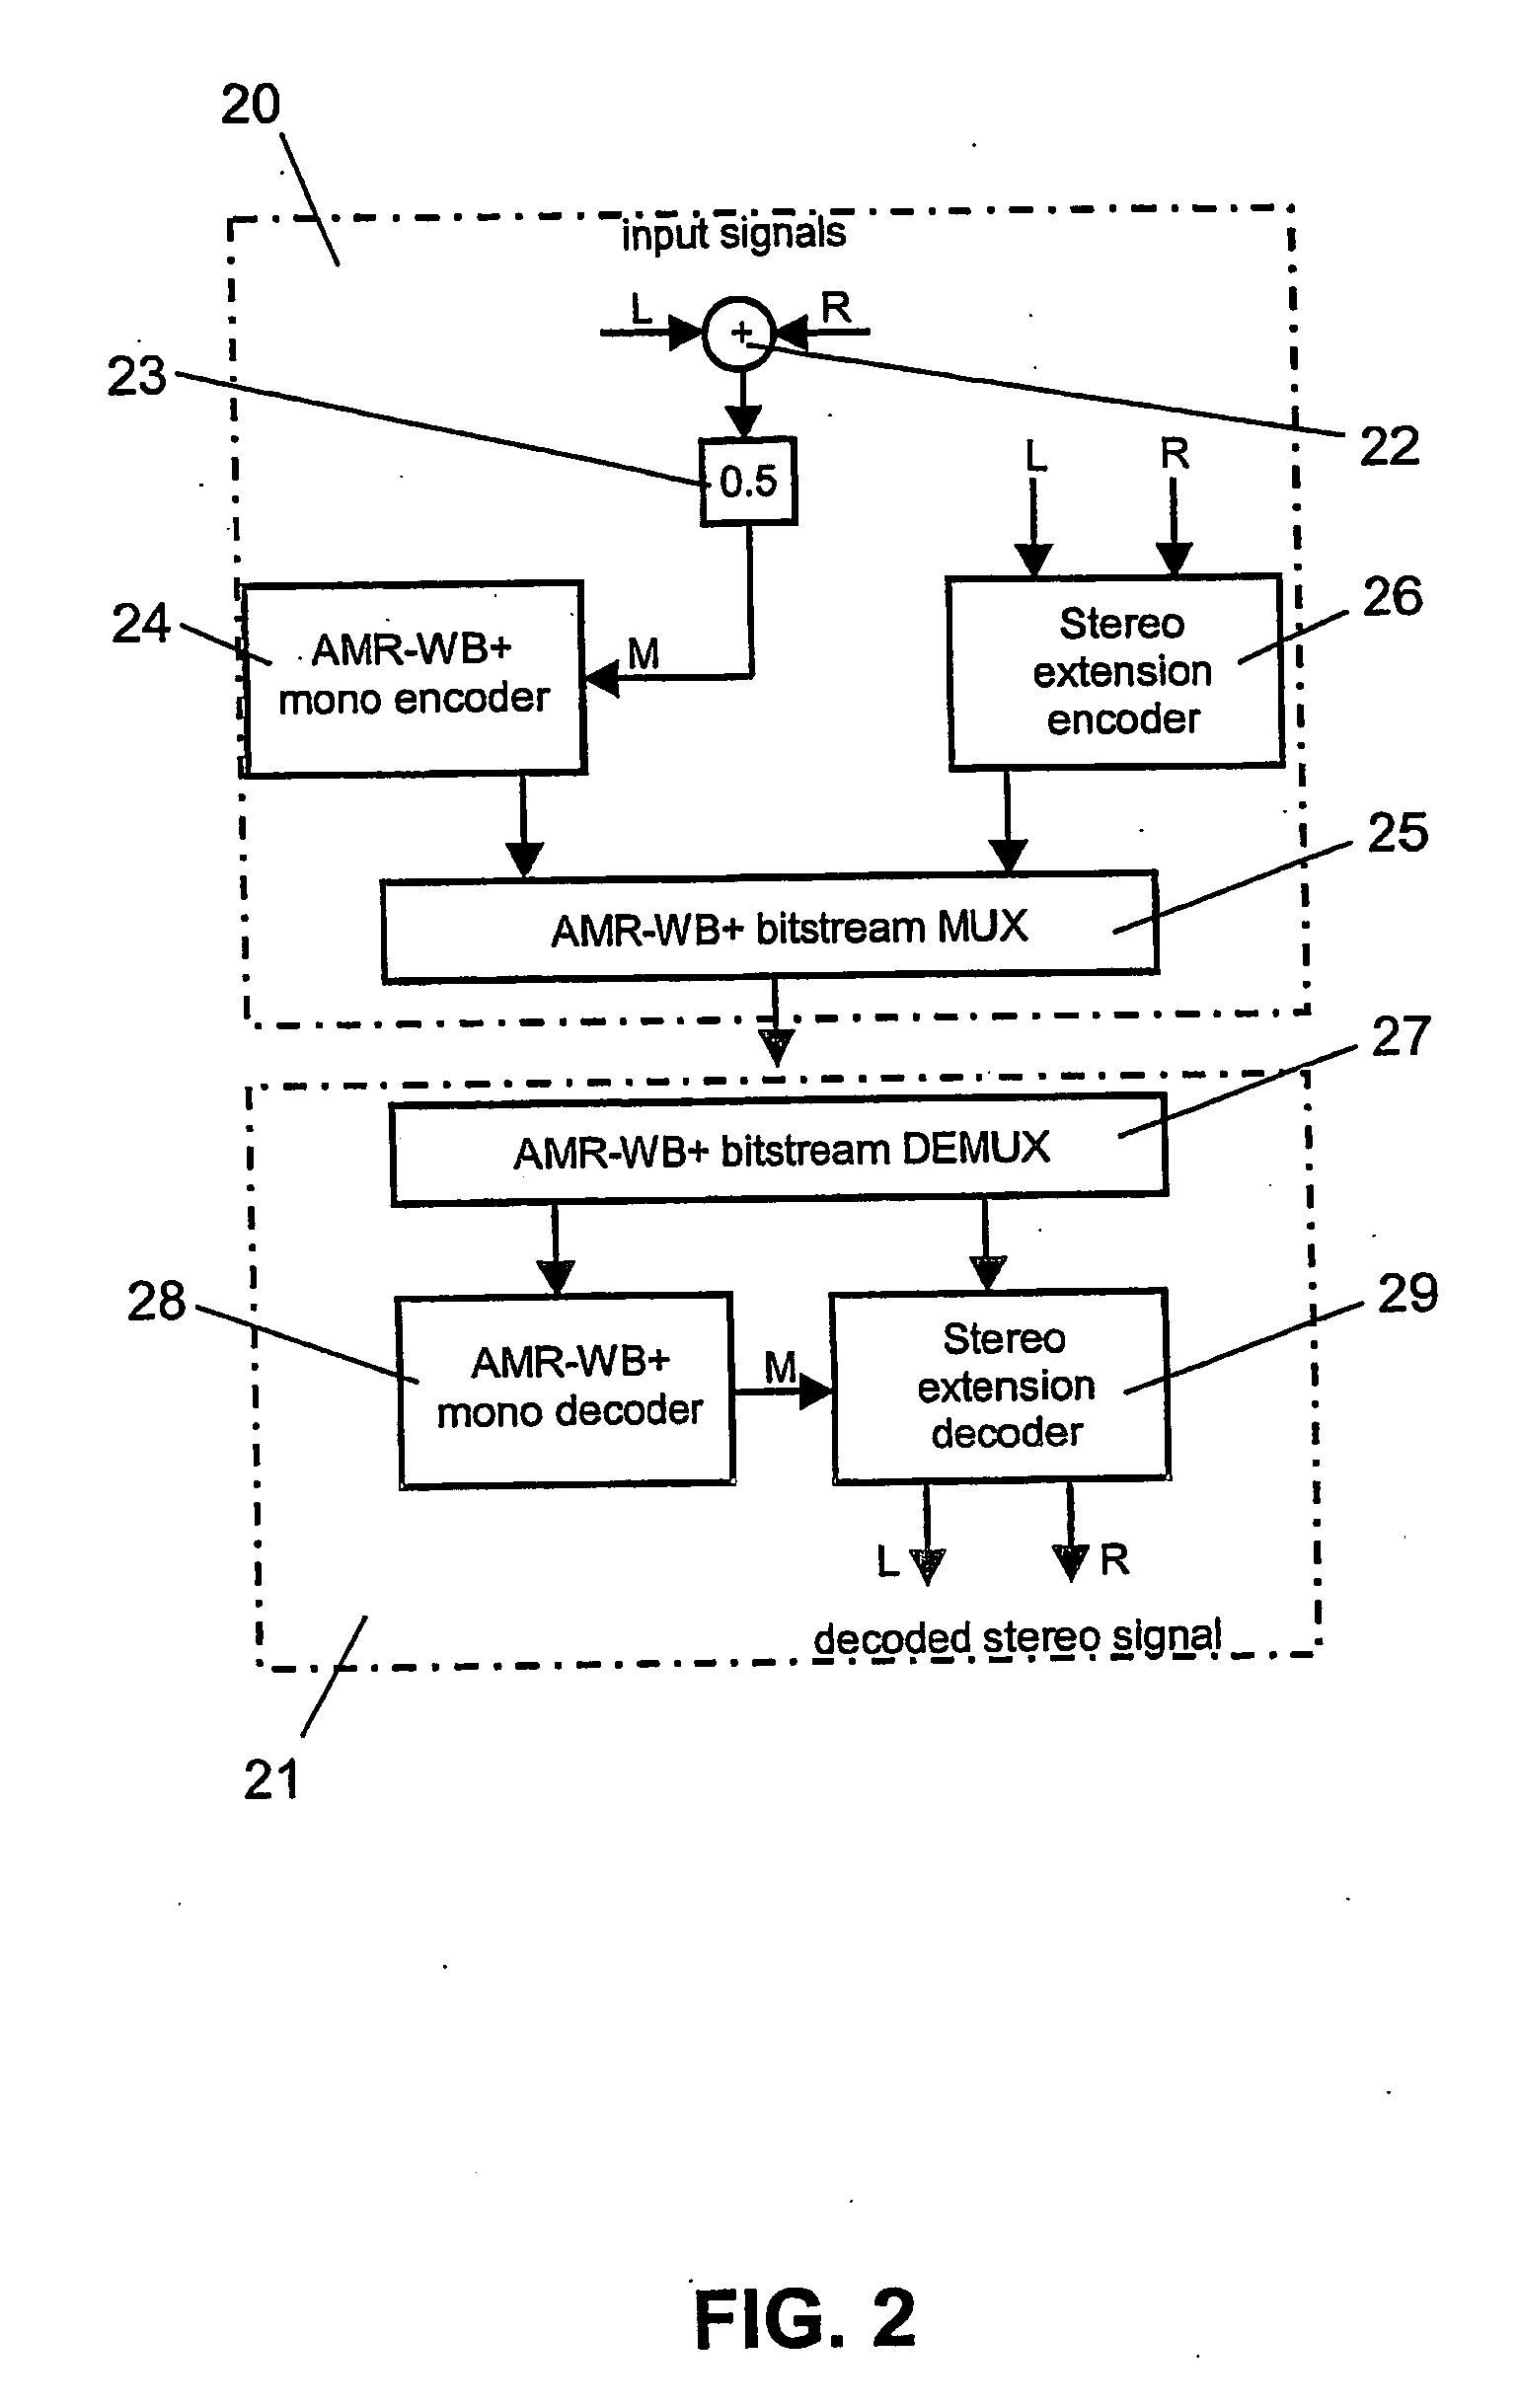 Support of a multichannel audio extension